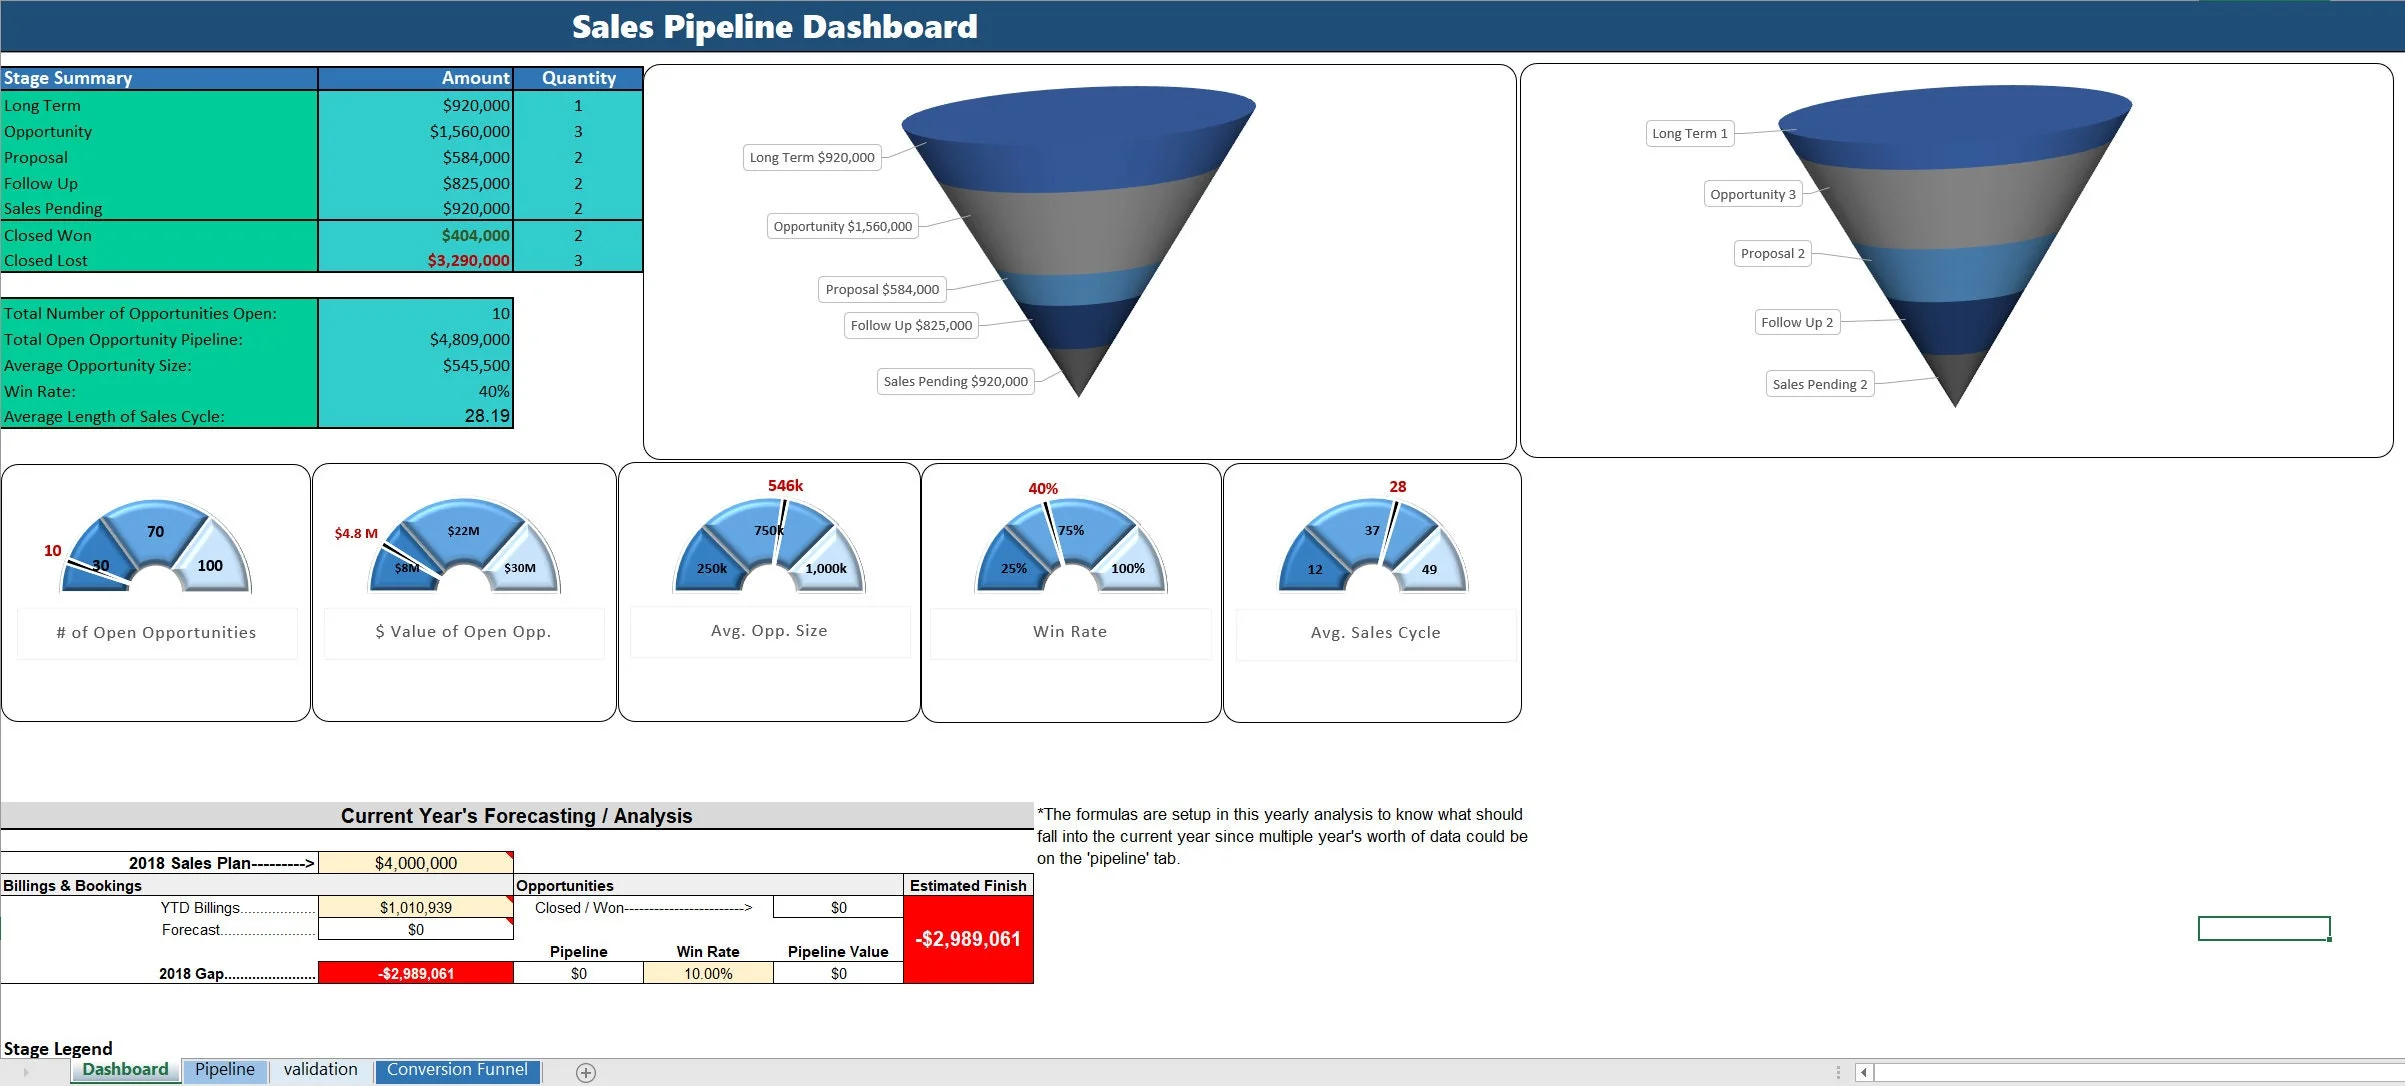 Sales Pipeline Tracker - Funnel and Gauge Visualizations (Excel template (XLSX)) Preview Image